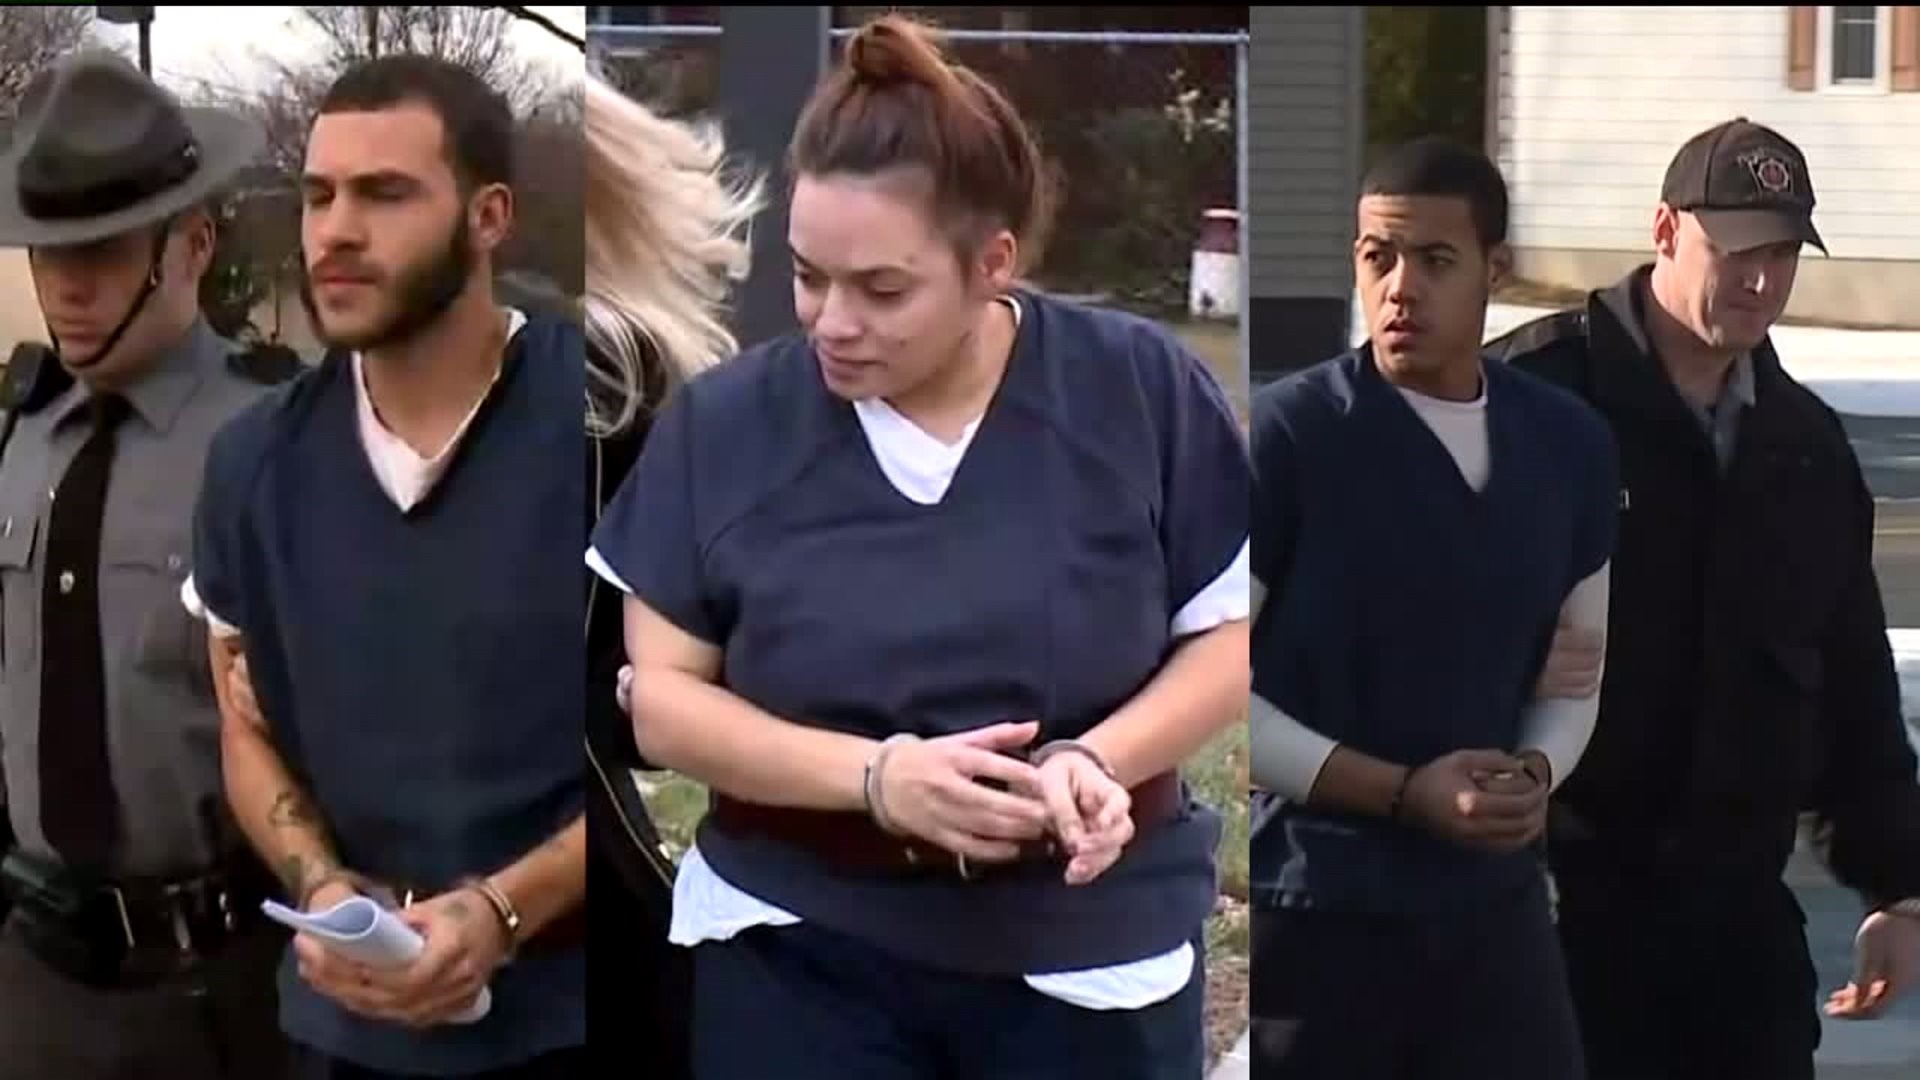 Trial Underway for Suspects in Shooting Death of Delivery Driver